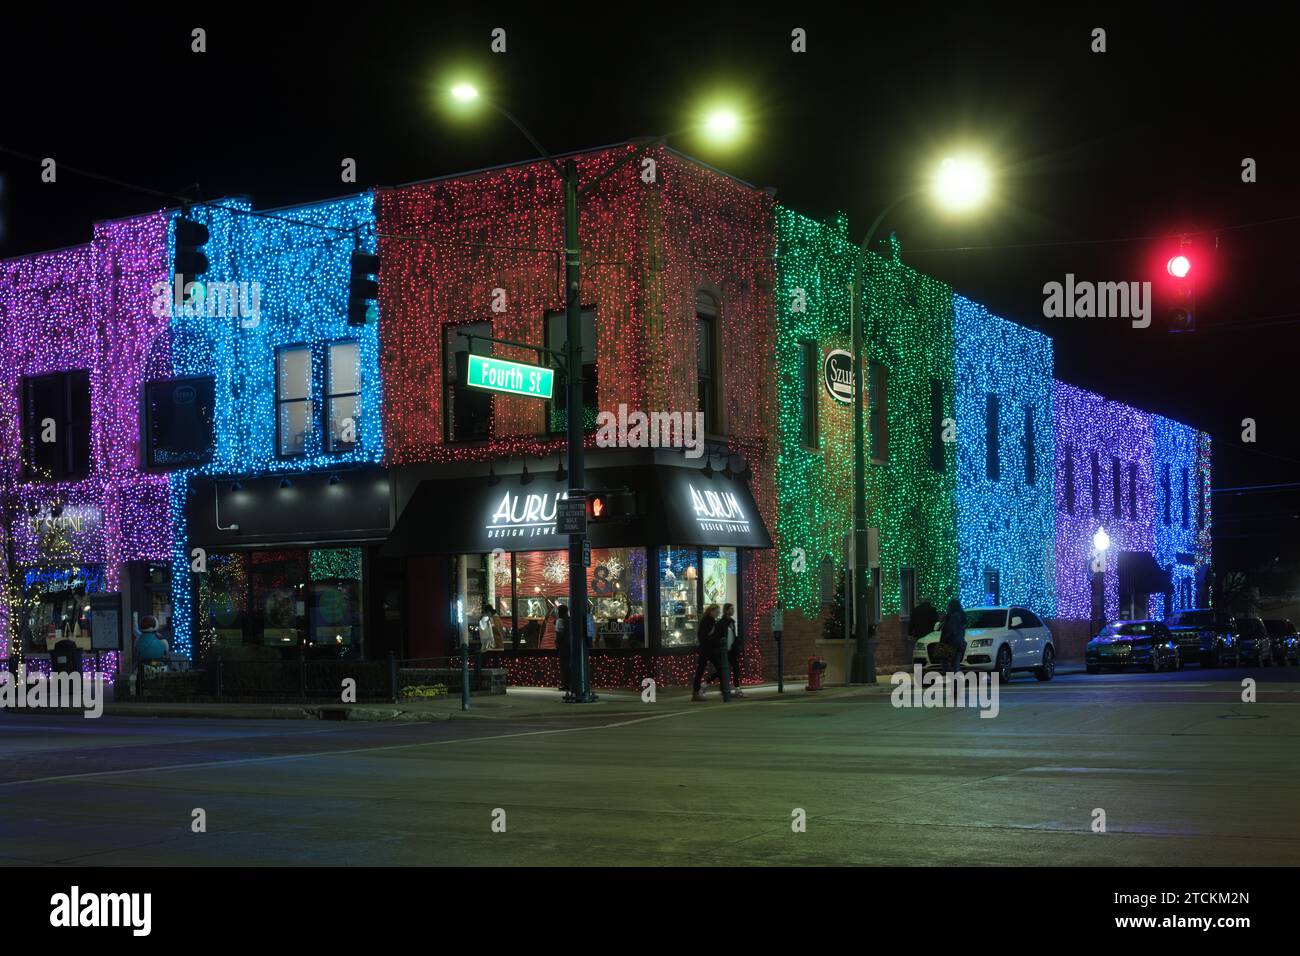 The Big, Bright Light Show Christmas lights in downtown Rochester Michigan USA Stock Photo